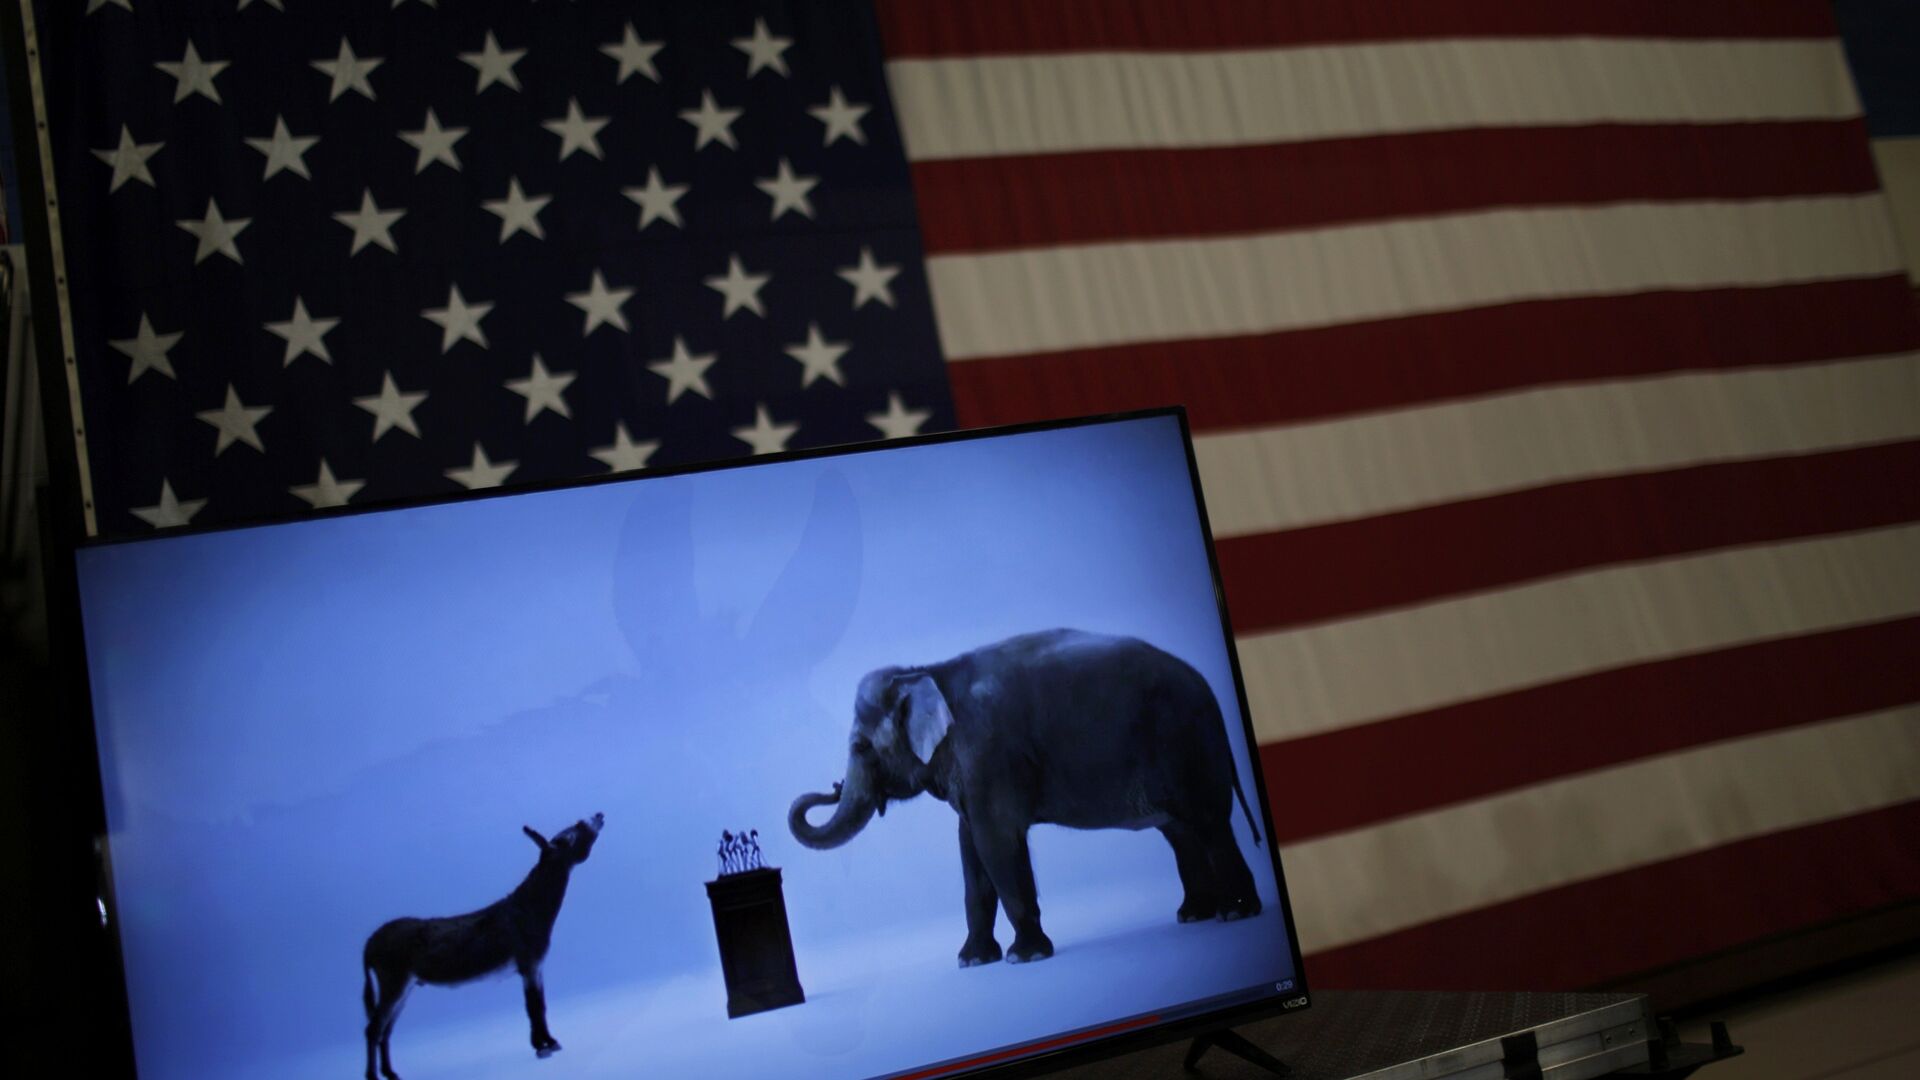 The mascots of the Democratic and Republican parties, a donkey for the Democrats and an elephant for the GOP, are seen on a video screen at Democratic U.S. presidential candidate Hillary Clinton's campaign rally in Cleveland, Ohio March 8, 2016 - Sputnik International, 1920, 20.01.2022